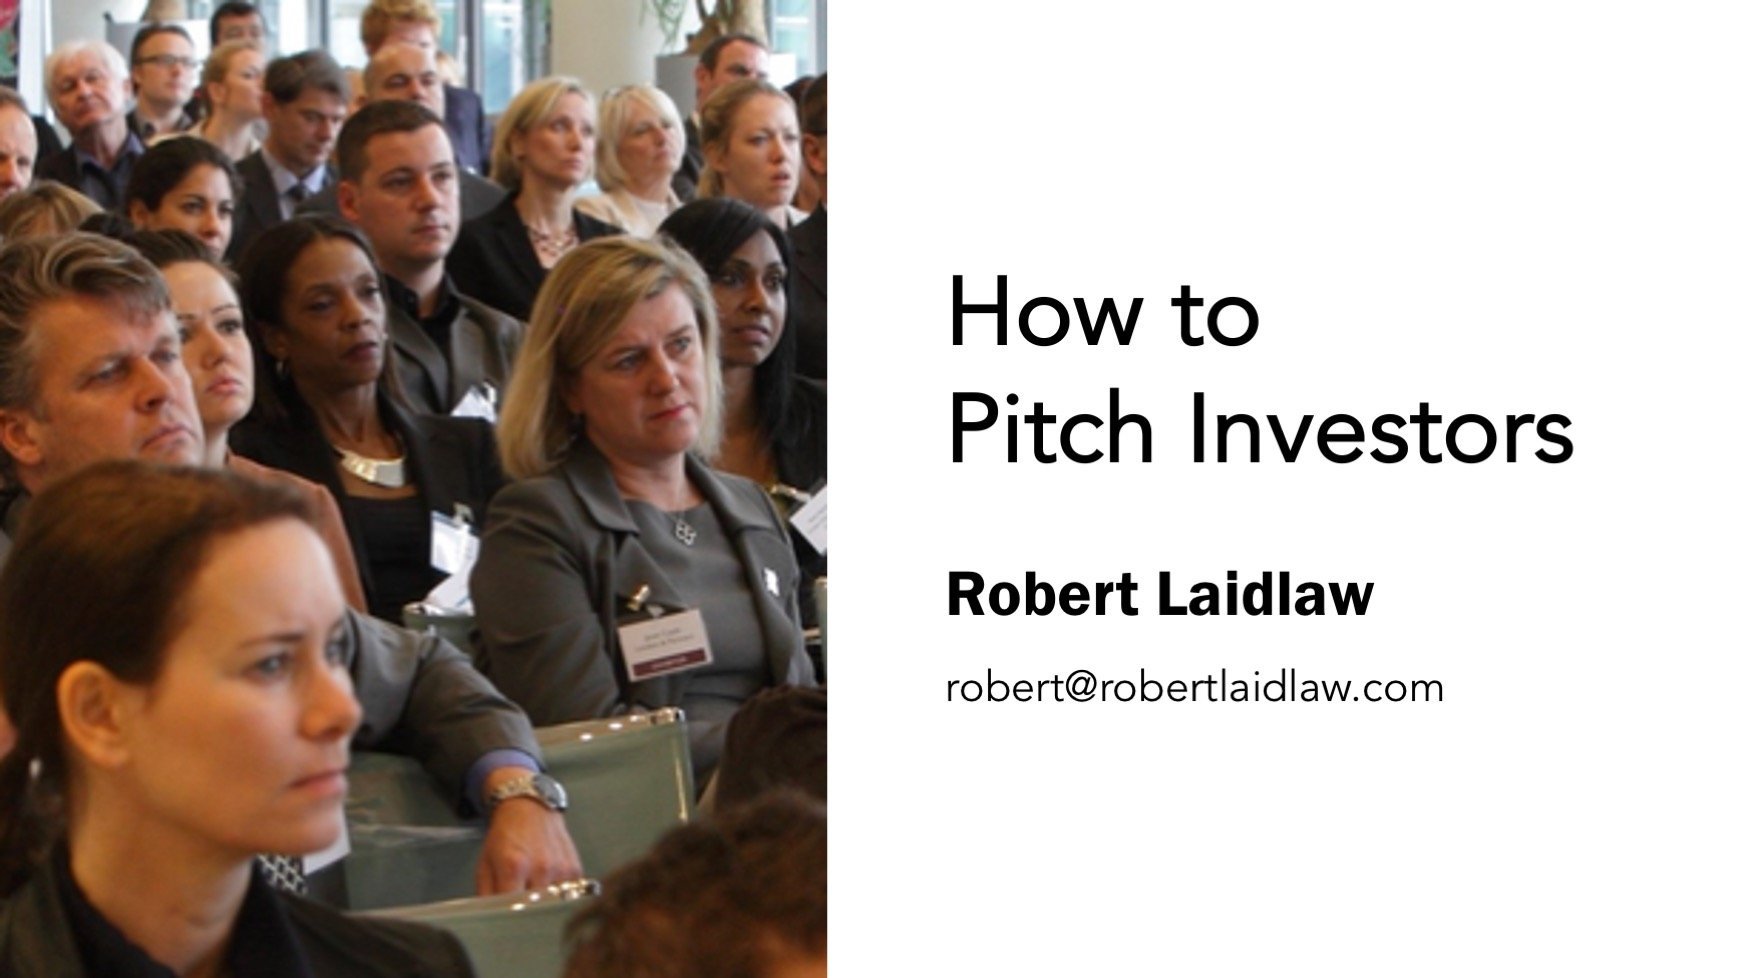 How to Pitch Investors